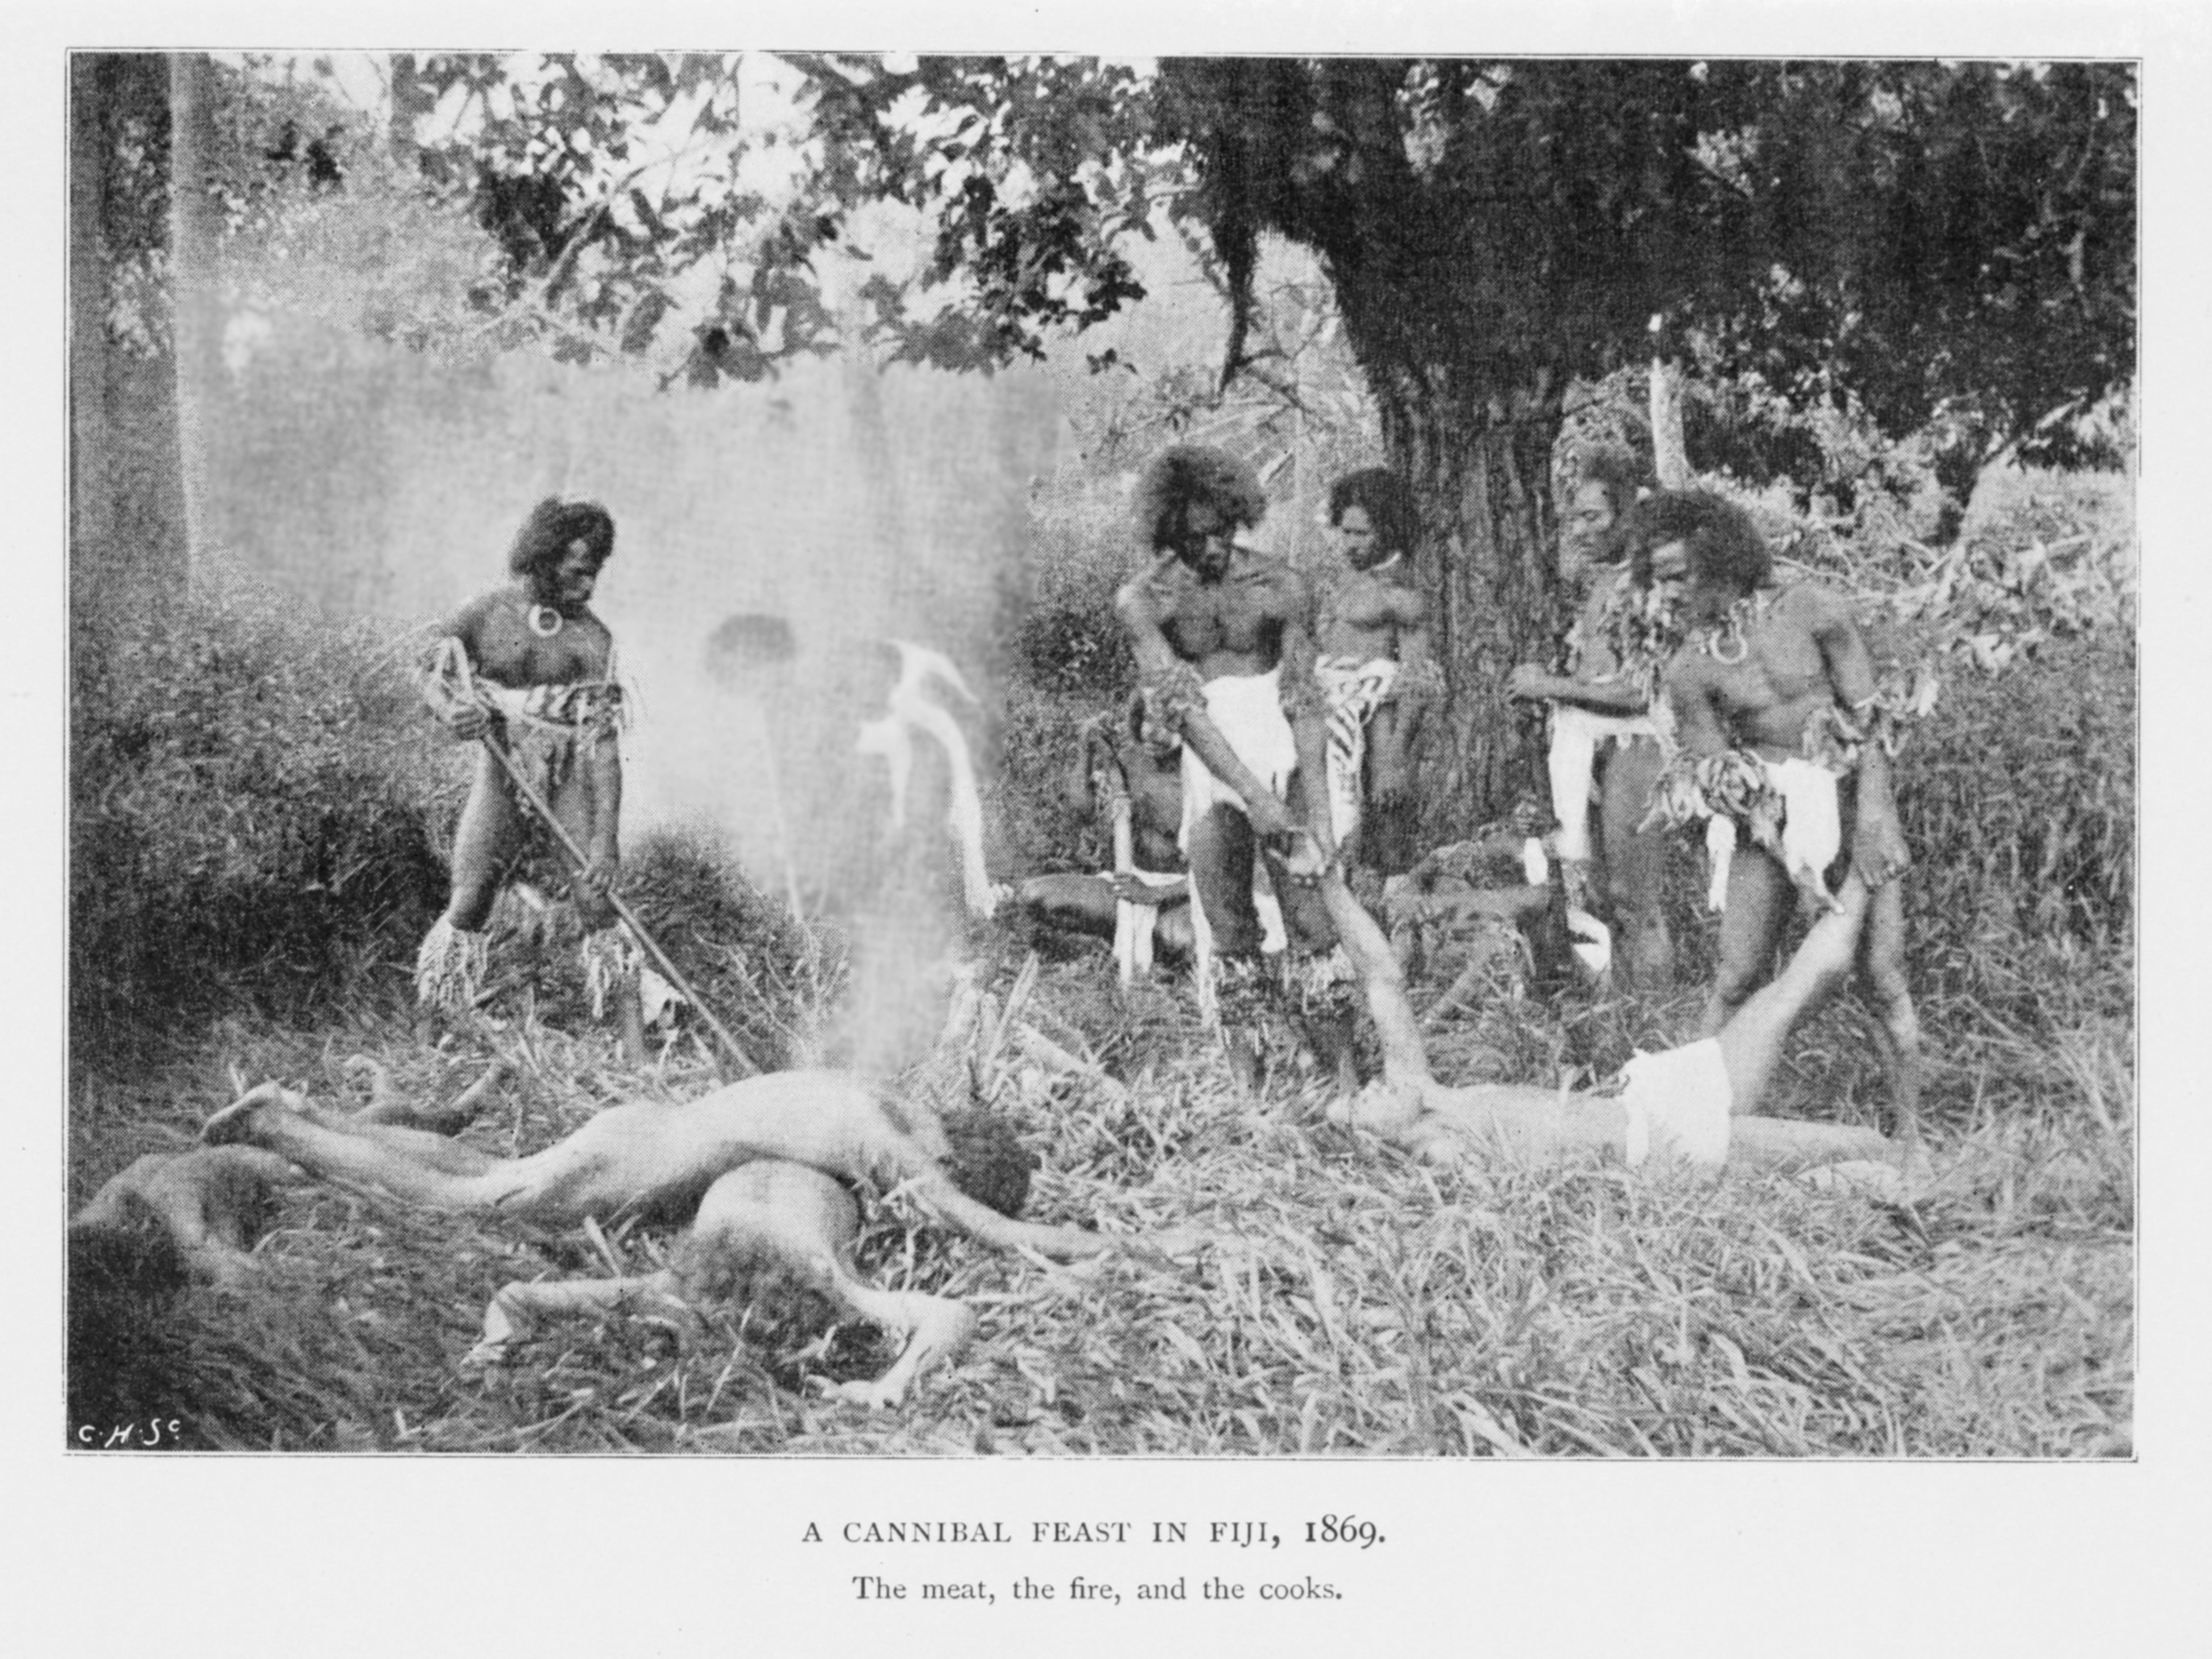 ‘A Cannibal Feast in Fiji, 1869: The meat, the fire, and the cooks’, from Brown Men and Women, 1898, by Edward Reeves